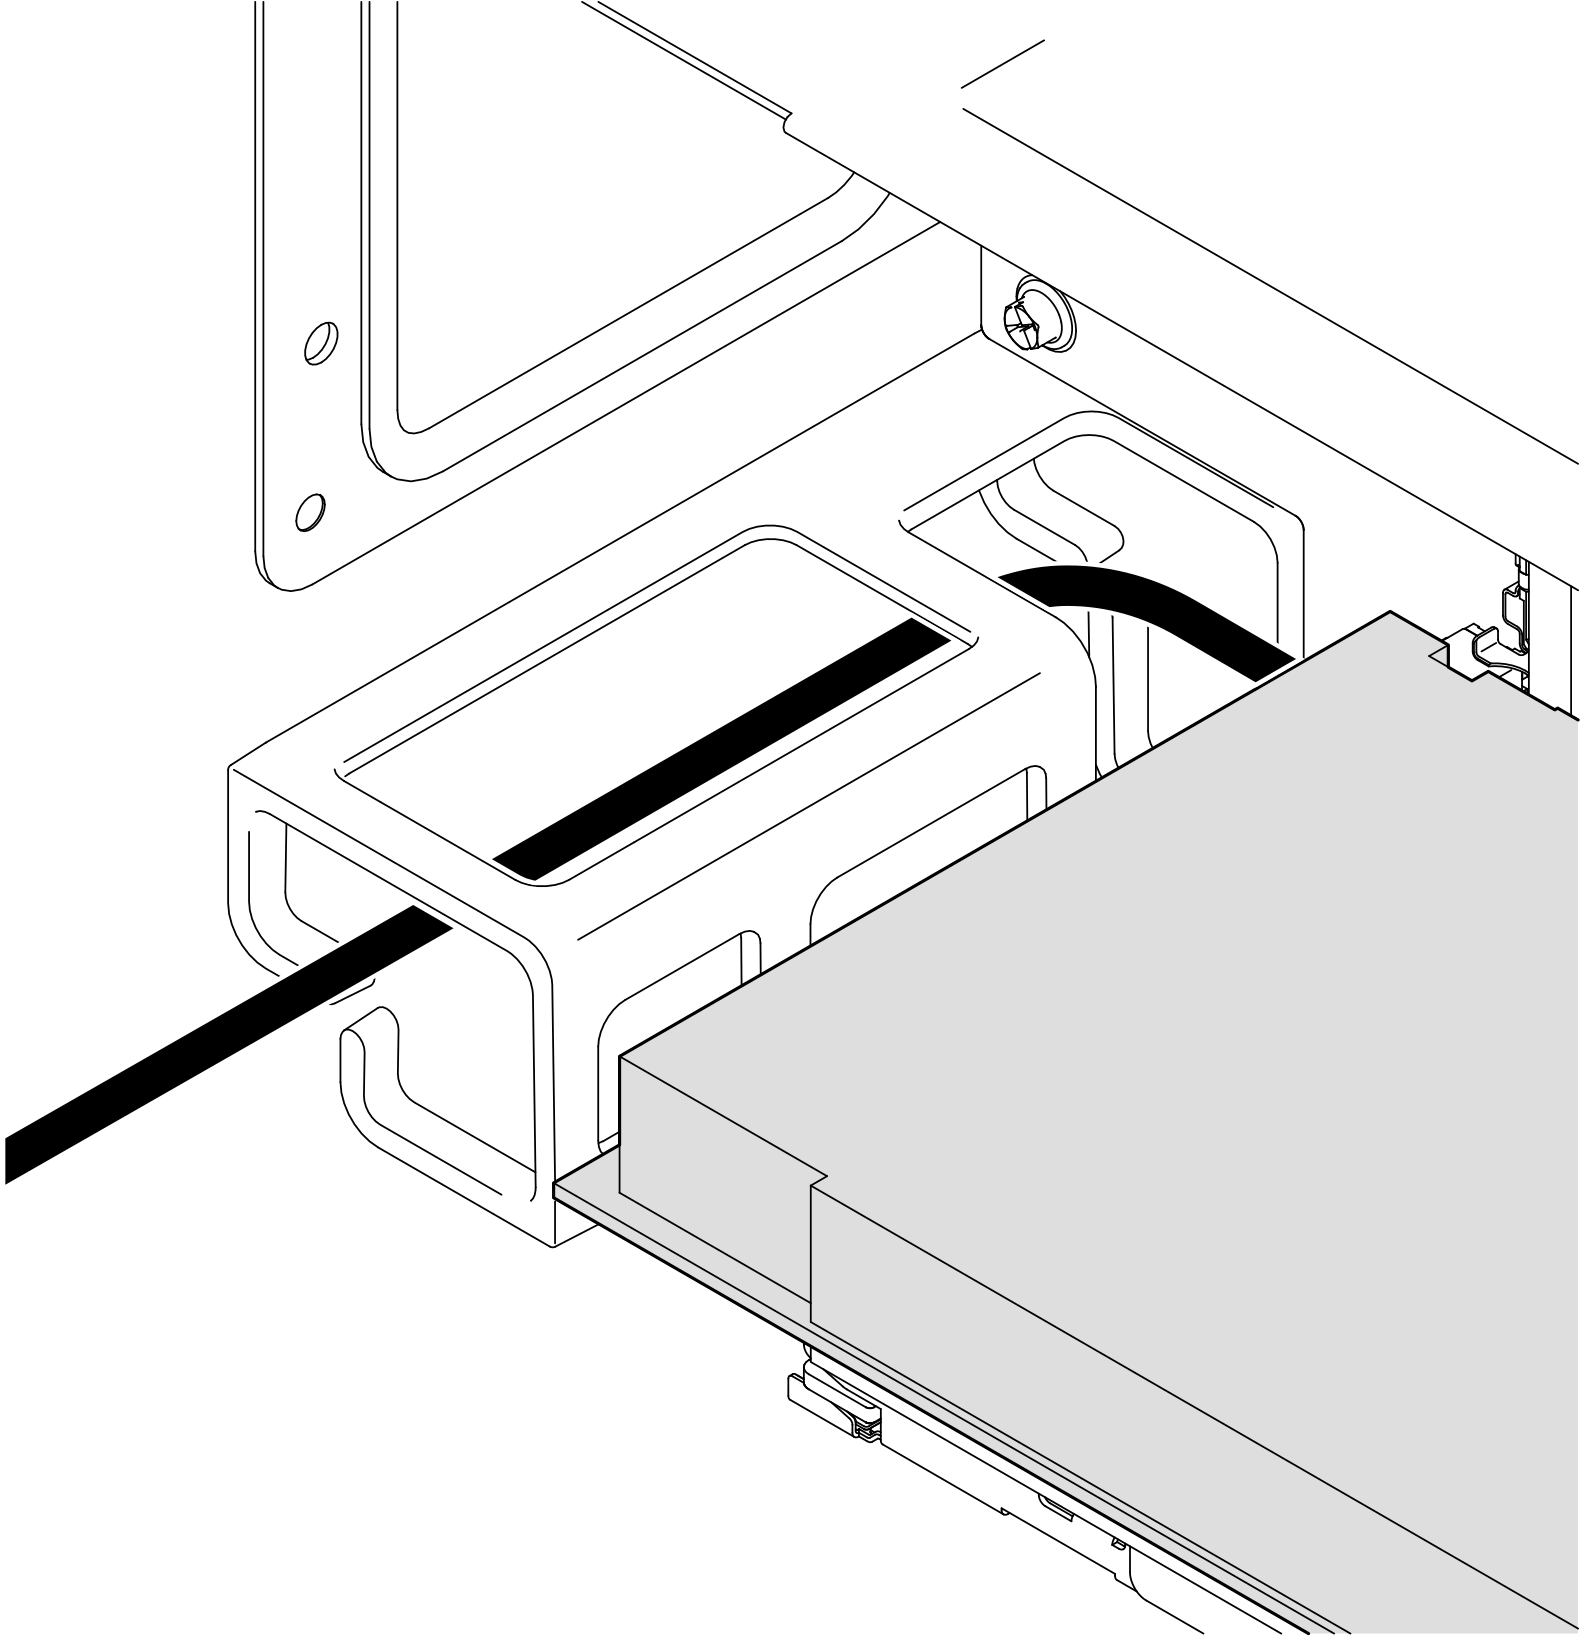 Routing cable in PCIe riser 1